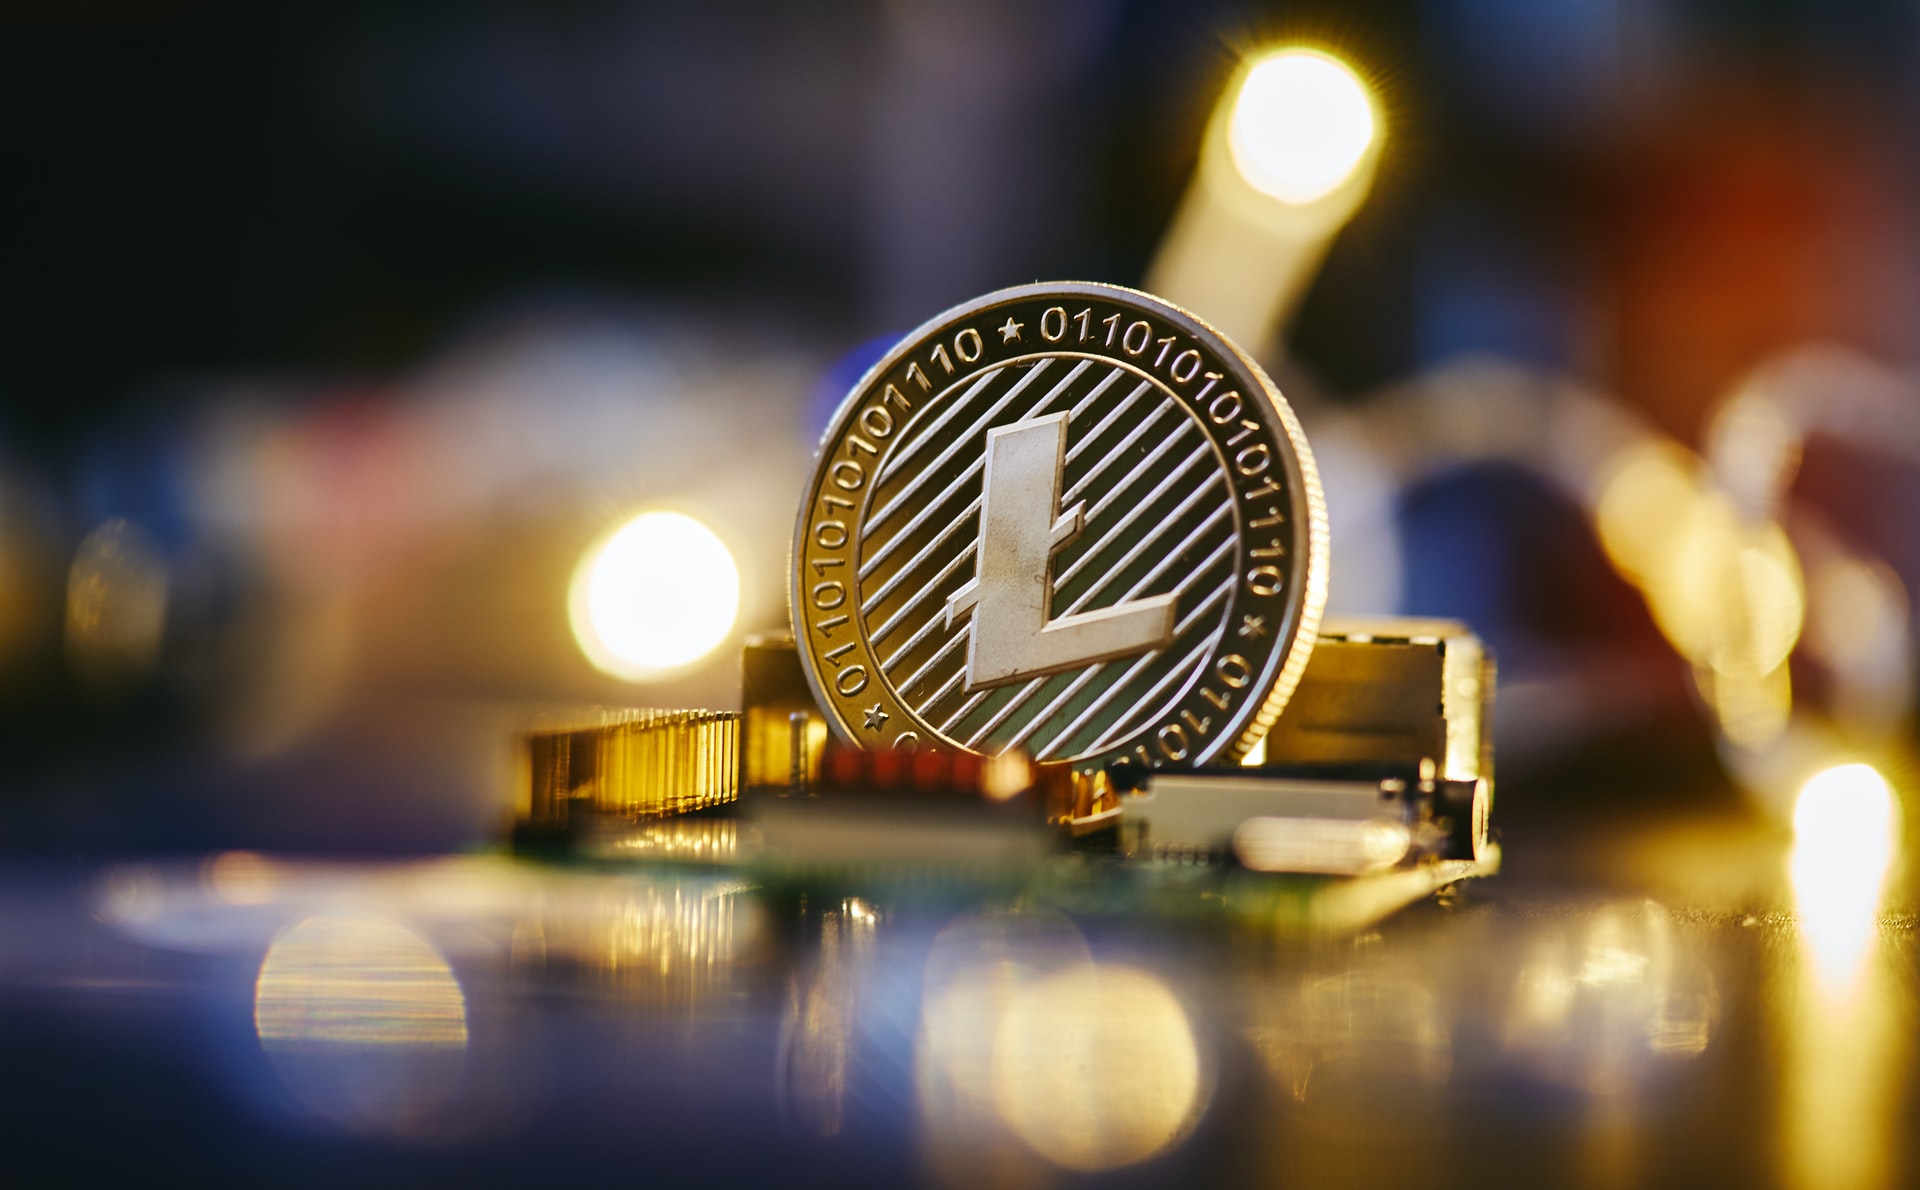 Check out our tips for you to buy Litecoin! Source: Unsplash